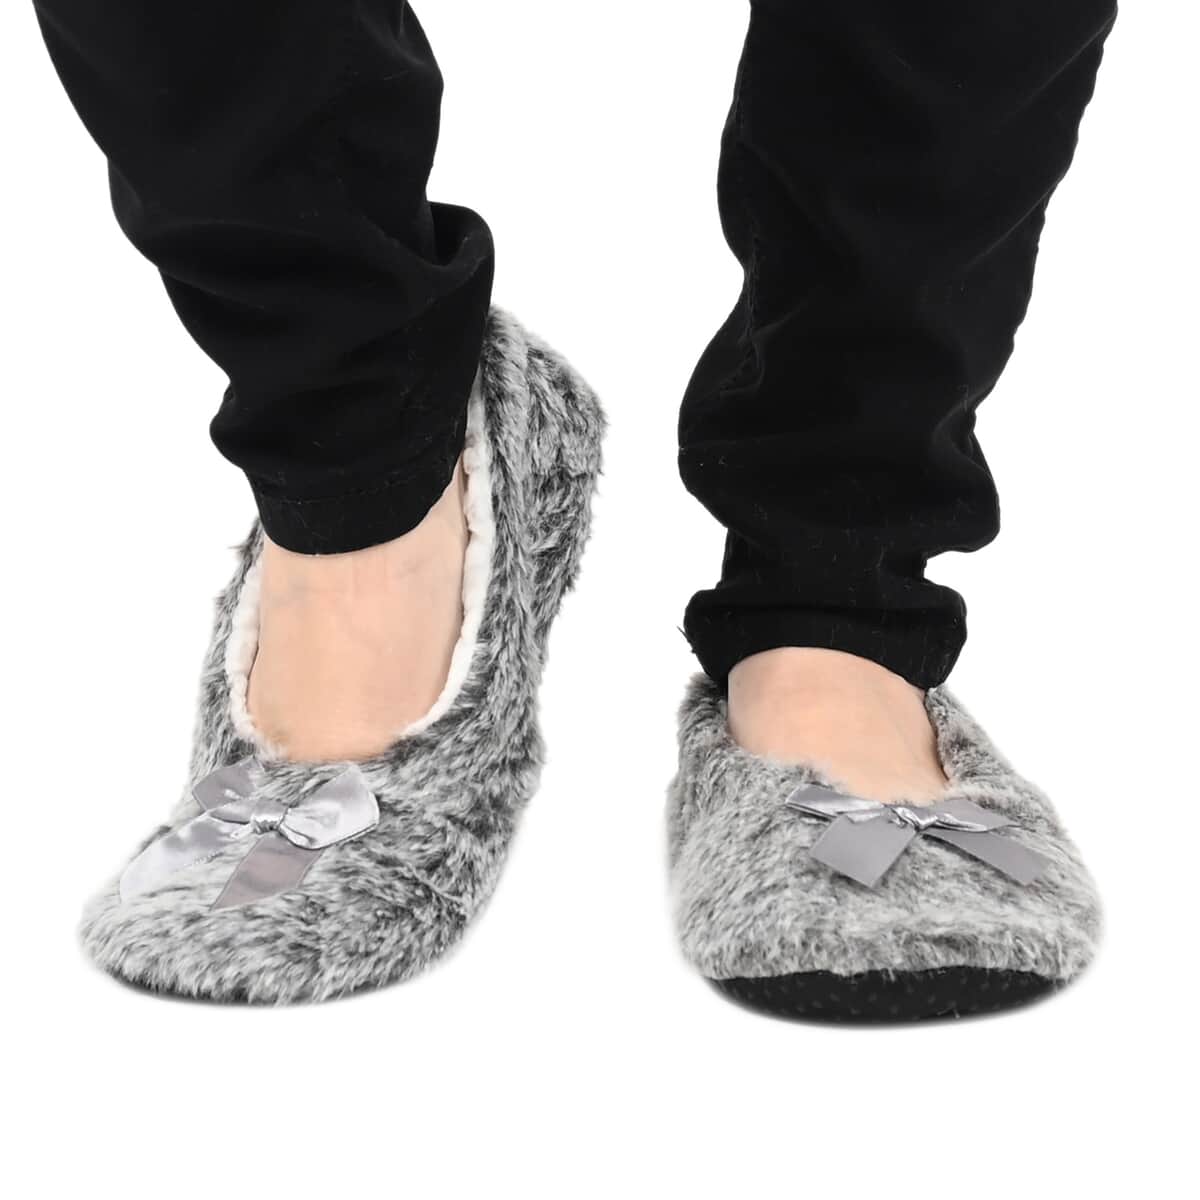 Set of 2 Pairs Grey Faux Fur Sherpa Home Bootie and Home Shoes (2.54"x7.08") image number 3